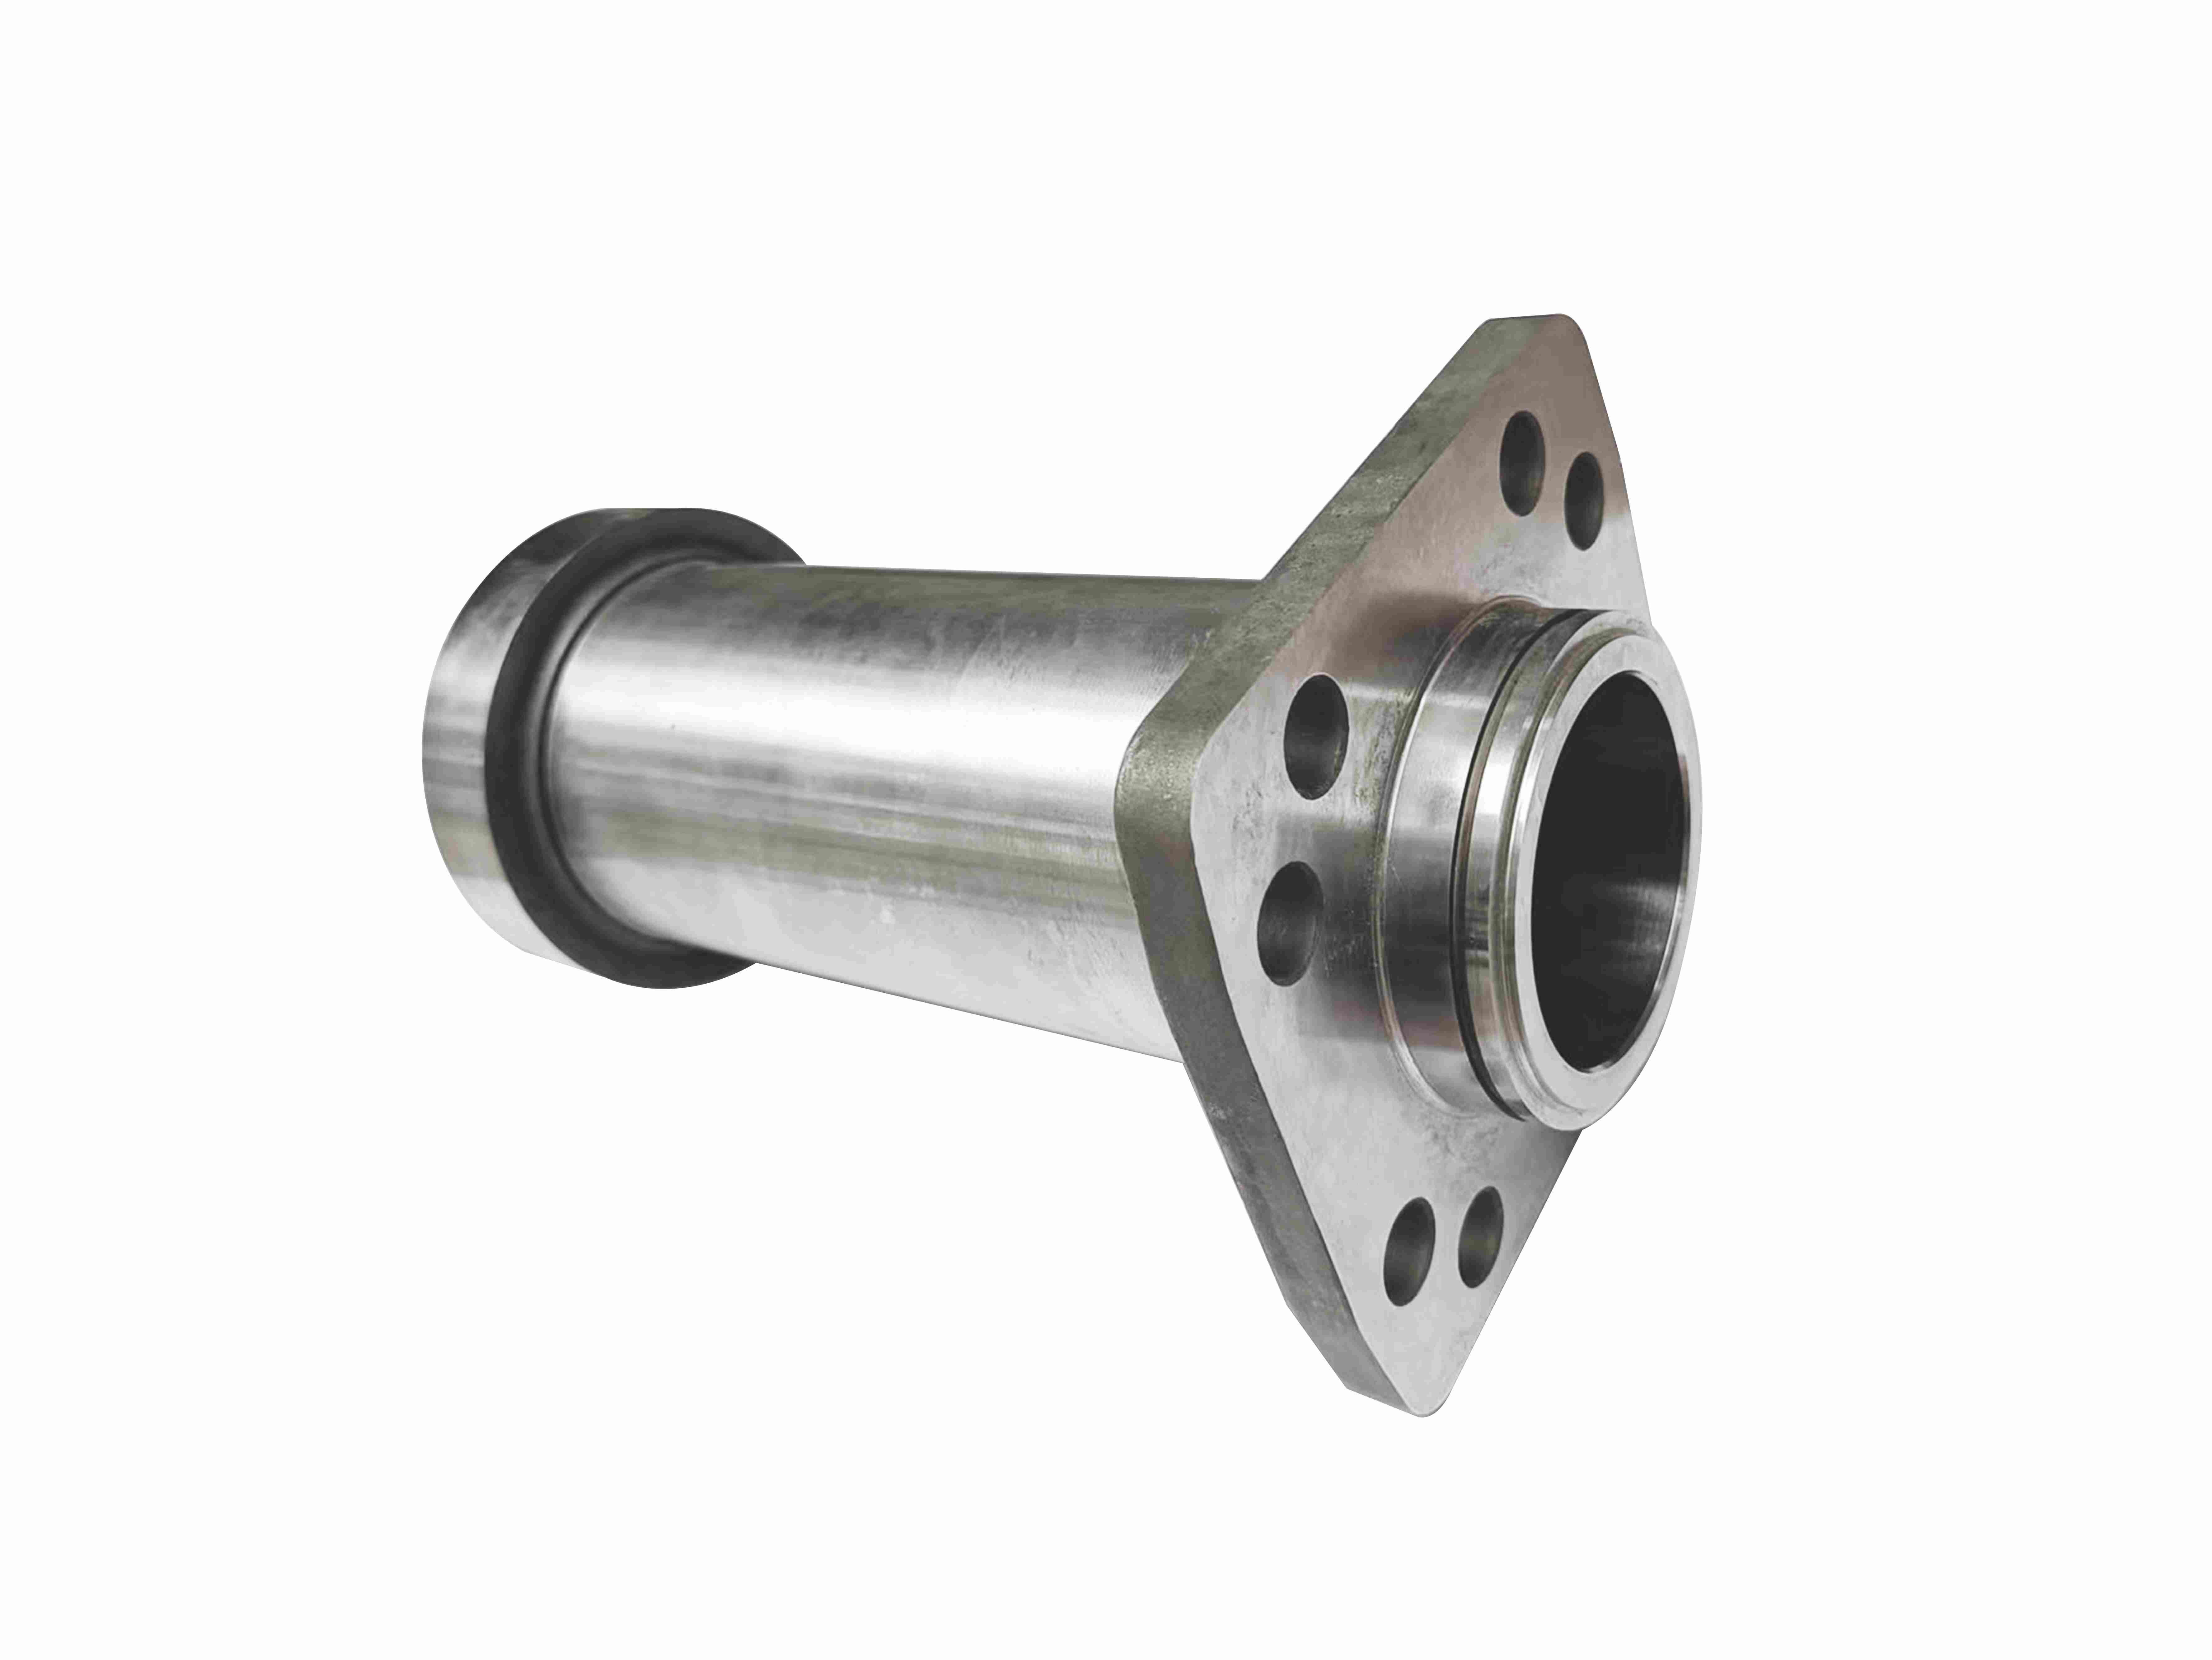 Martensitic Stainless Steel Piston Cylinder Processing